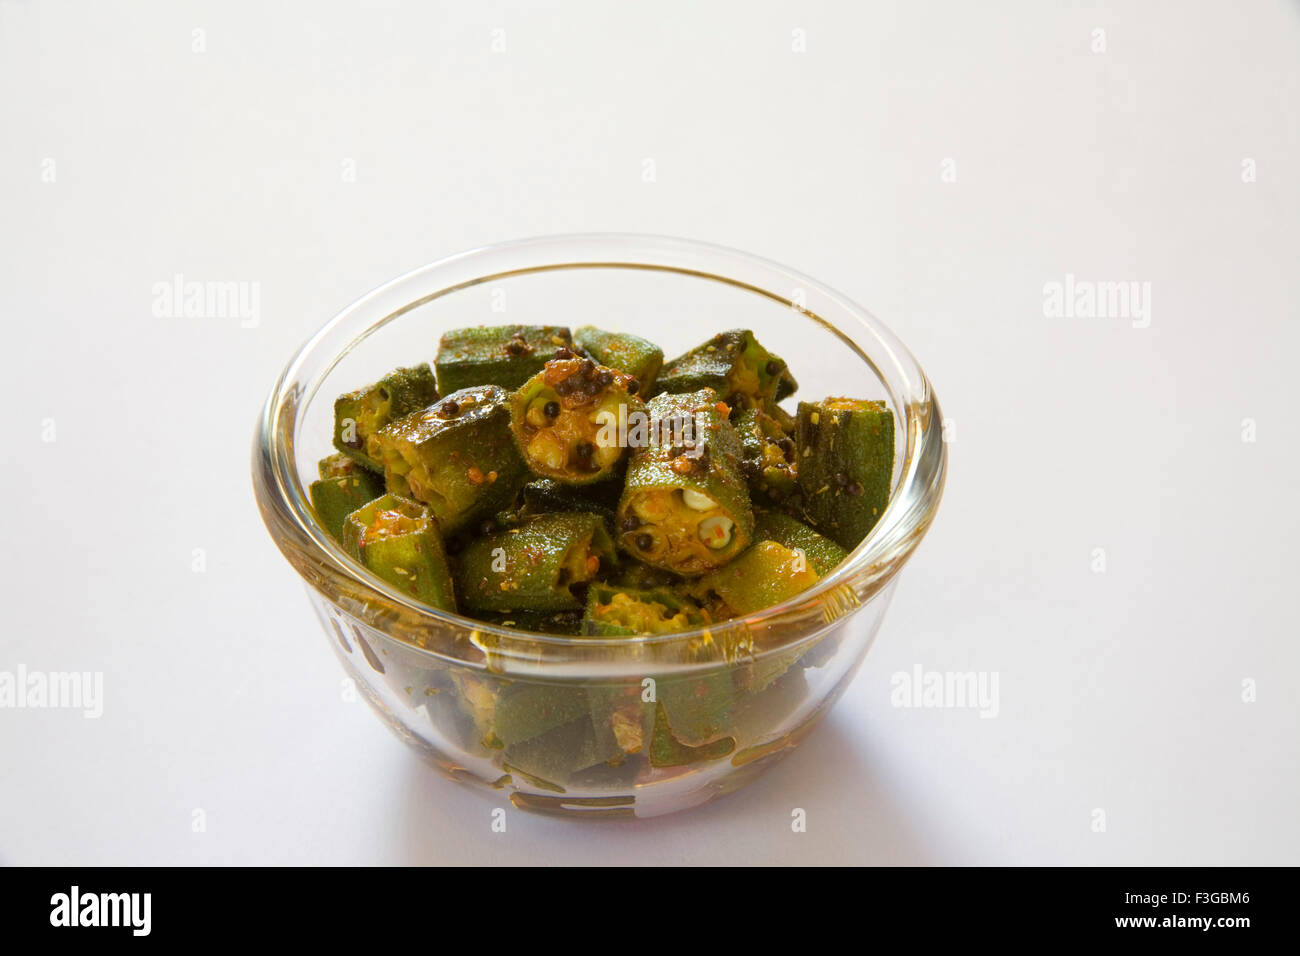 Indian cuisine vegetable bhindi masala lady's finger okra served in bowls ; India Stock Photo